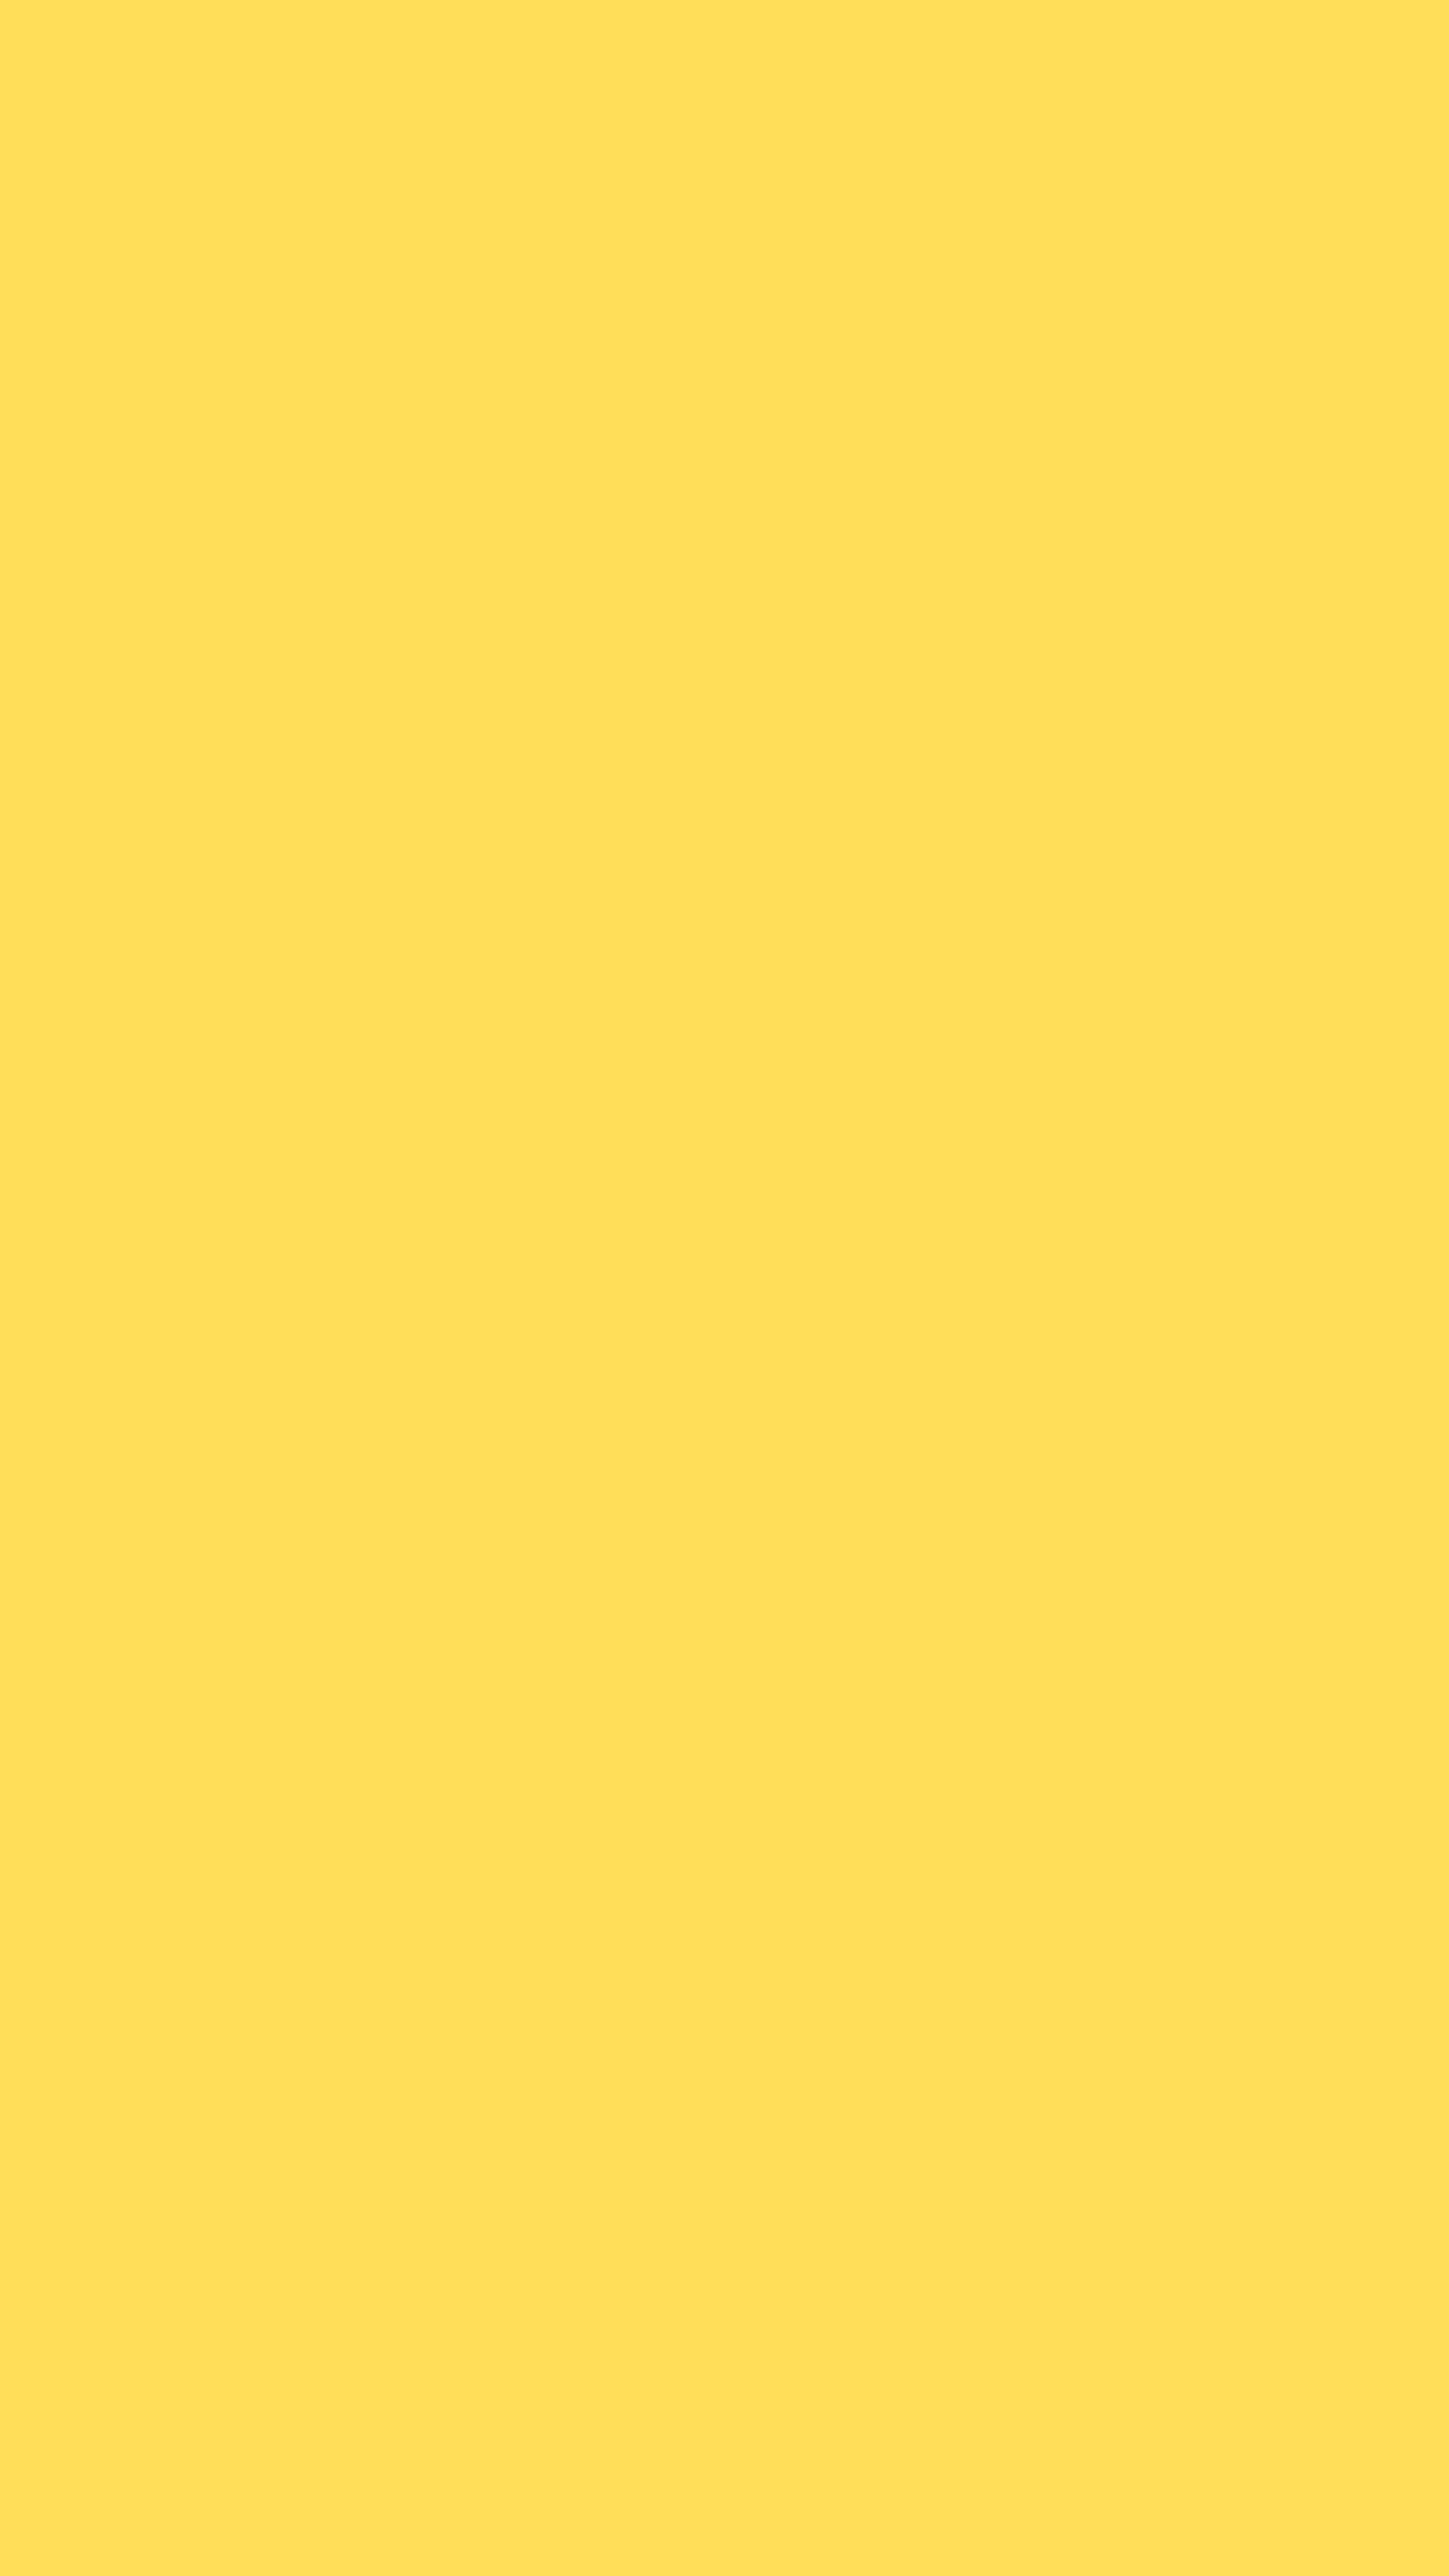 73906 free download Yellow wallpapers for phone,  Yellow images and screensavers for mobile